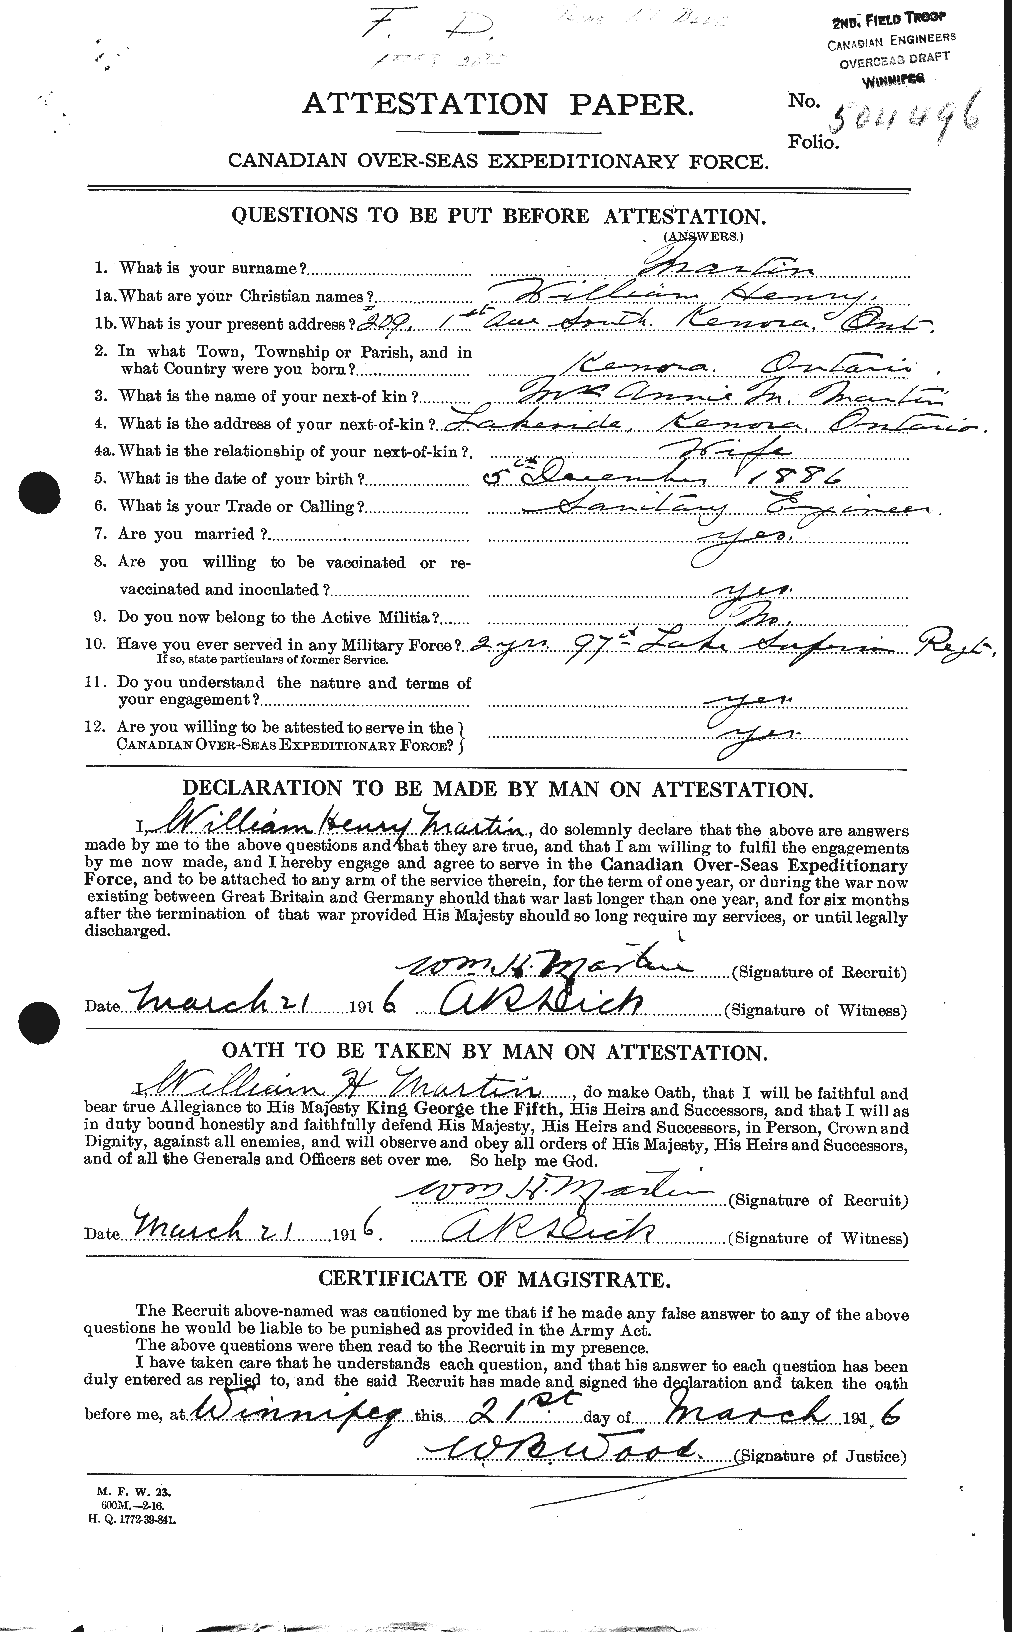 Personnel Records of the First World War - CEF 485783a